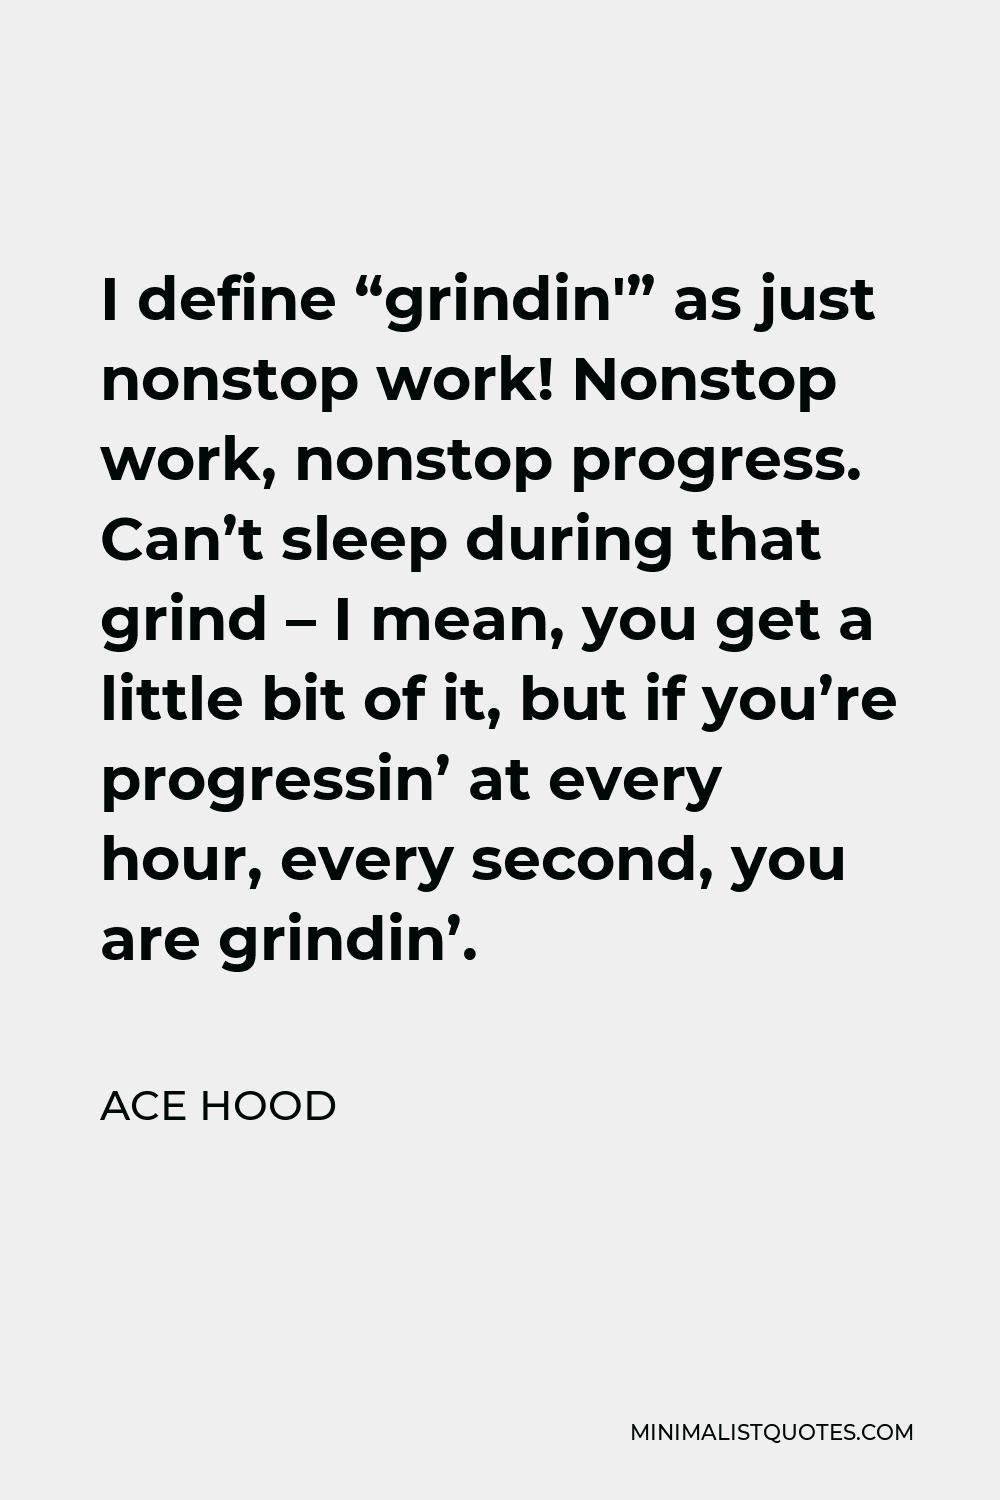 Ace Hood Quote - I define “grindin'” as just nonstop work! Nonstop work, nonstop progress. Can’t sleep during that grind – I mean, you get a little bit of it, but if you’re progressin’ at every hour, every second, you are grindin’.